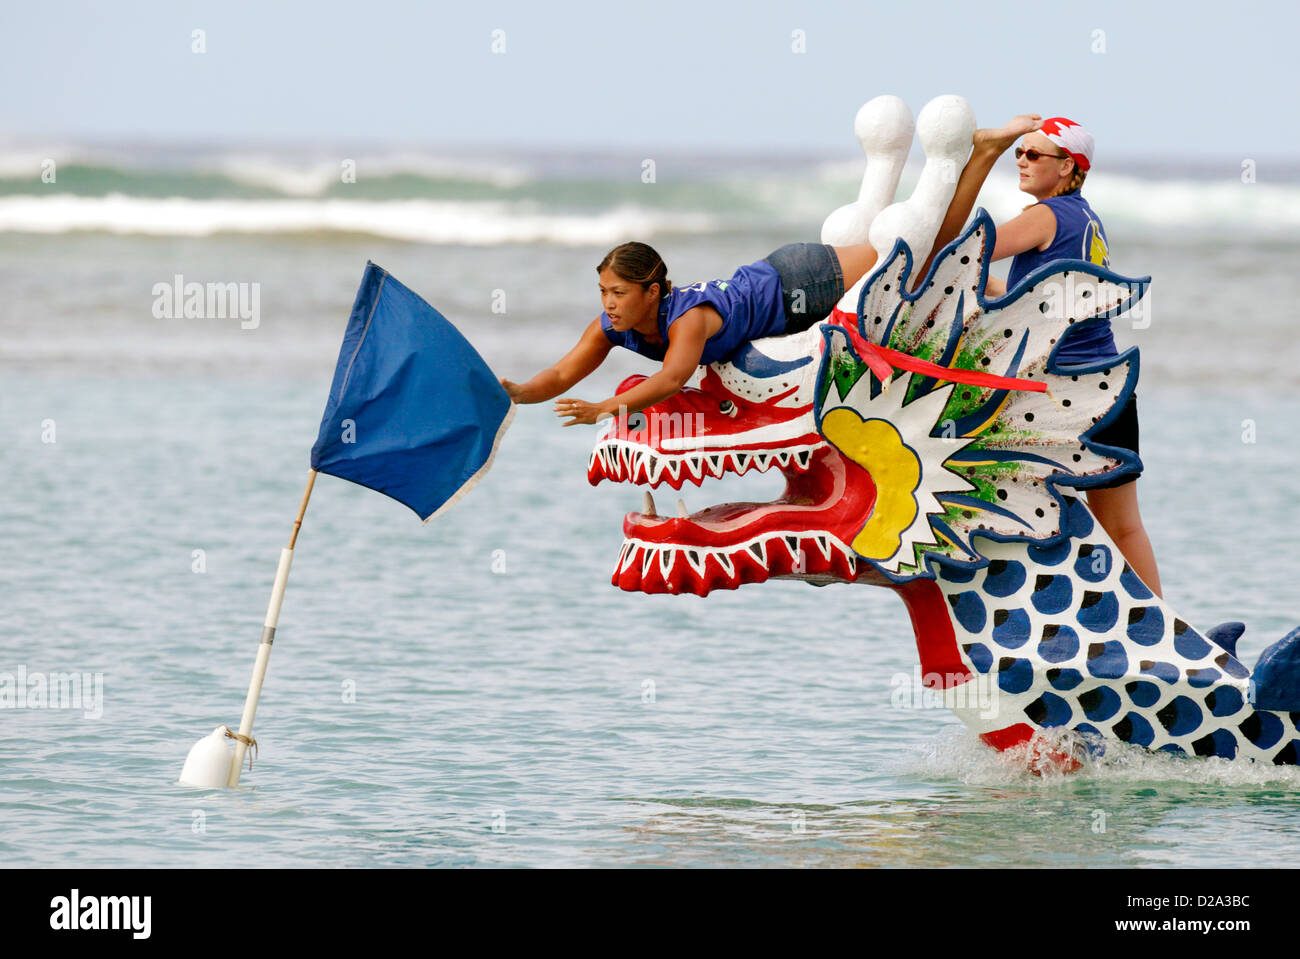 Honolulu Hawaii  Dragon Boat Race Flag Puller For Canadian Team Dragon Boat Festivals (Tuen Ng) Began In Fourth Century B.C In Stock Photo